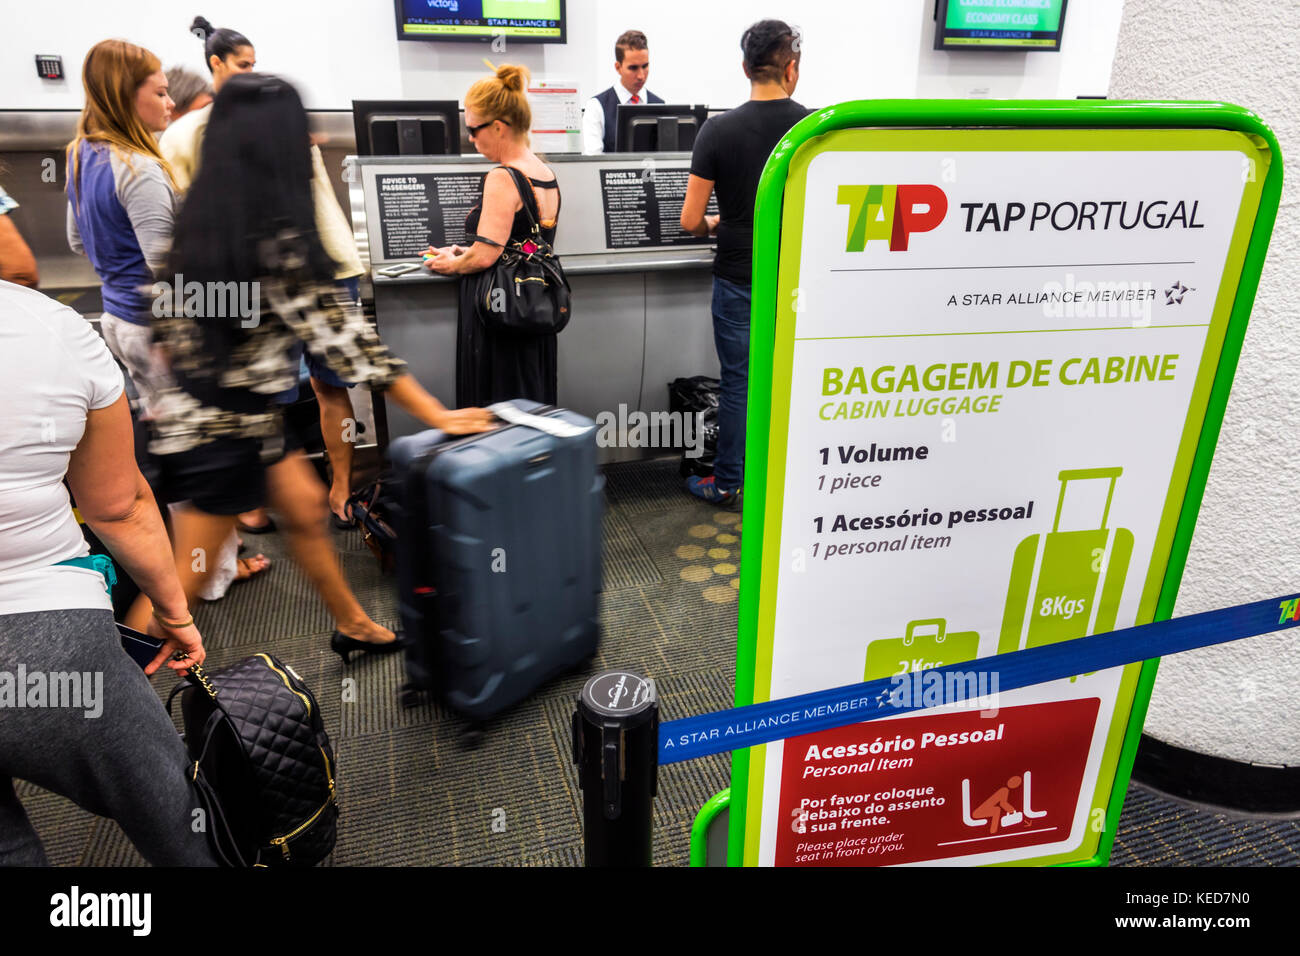 Tap Portugal Baggage Fees International Online Sales, UP TO 68% OFF |  www.ldeventos.com